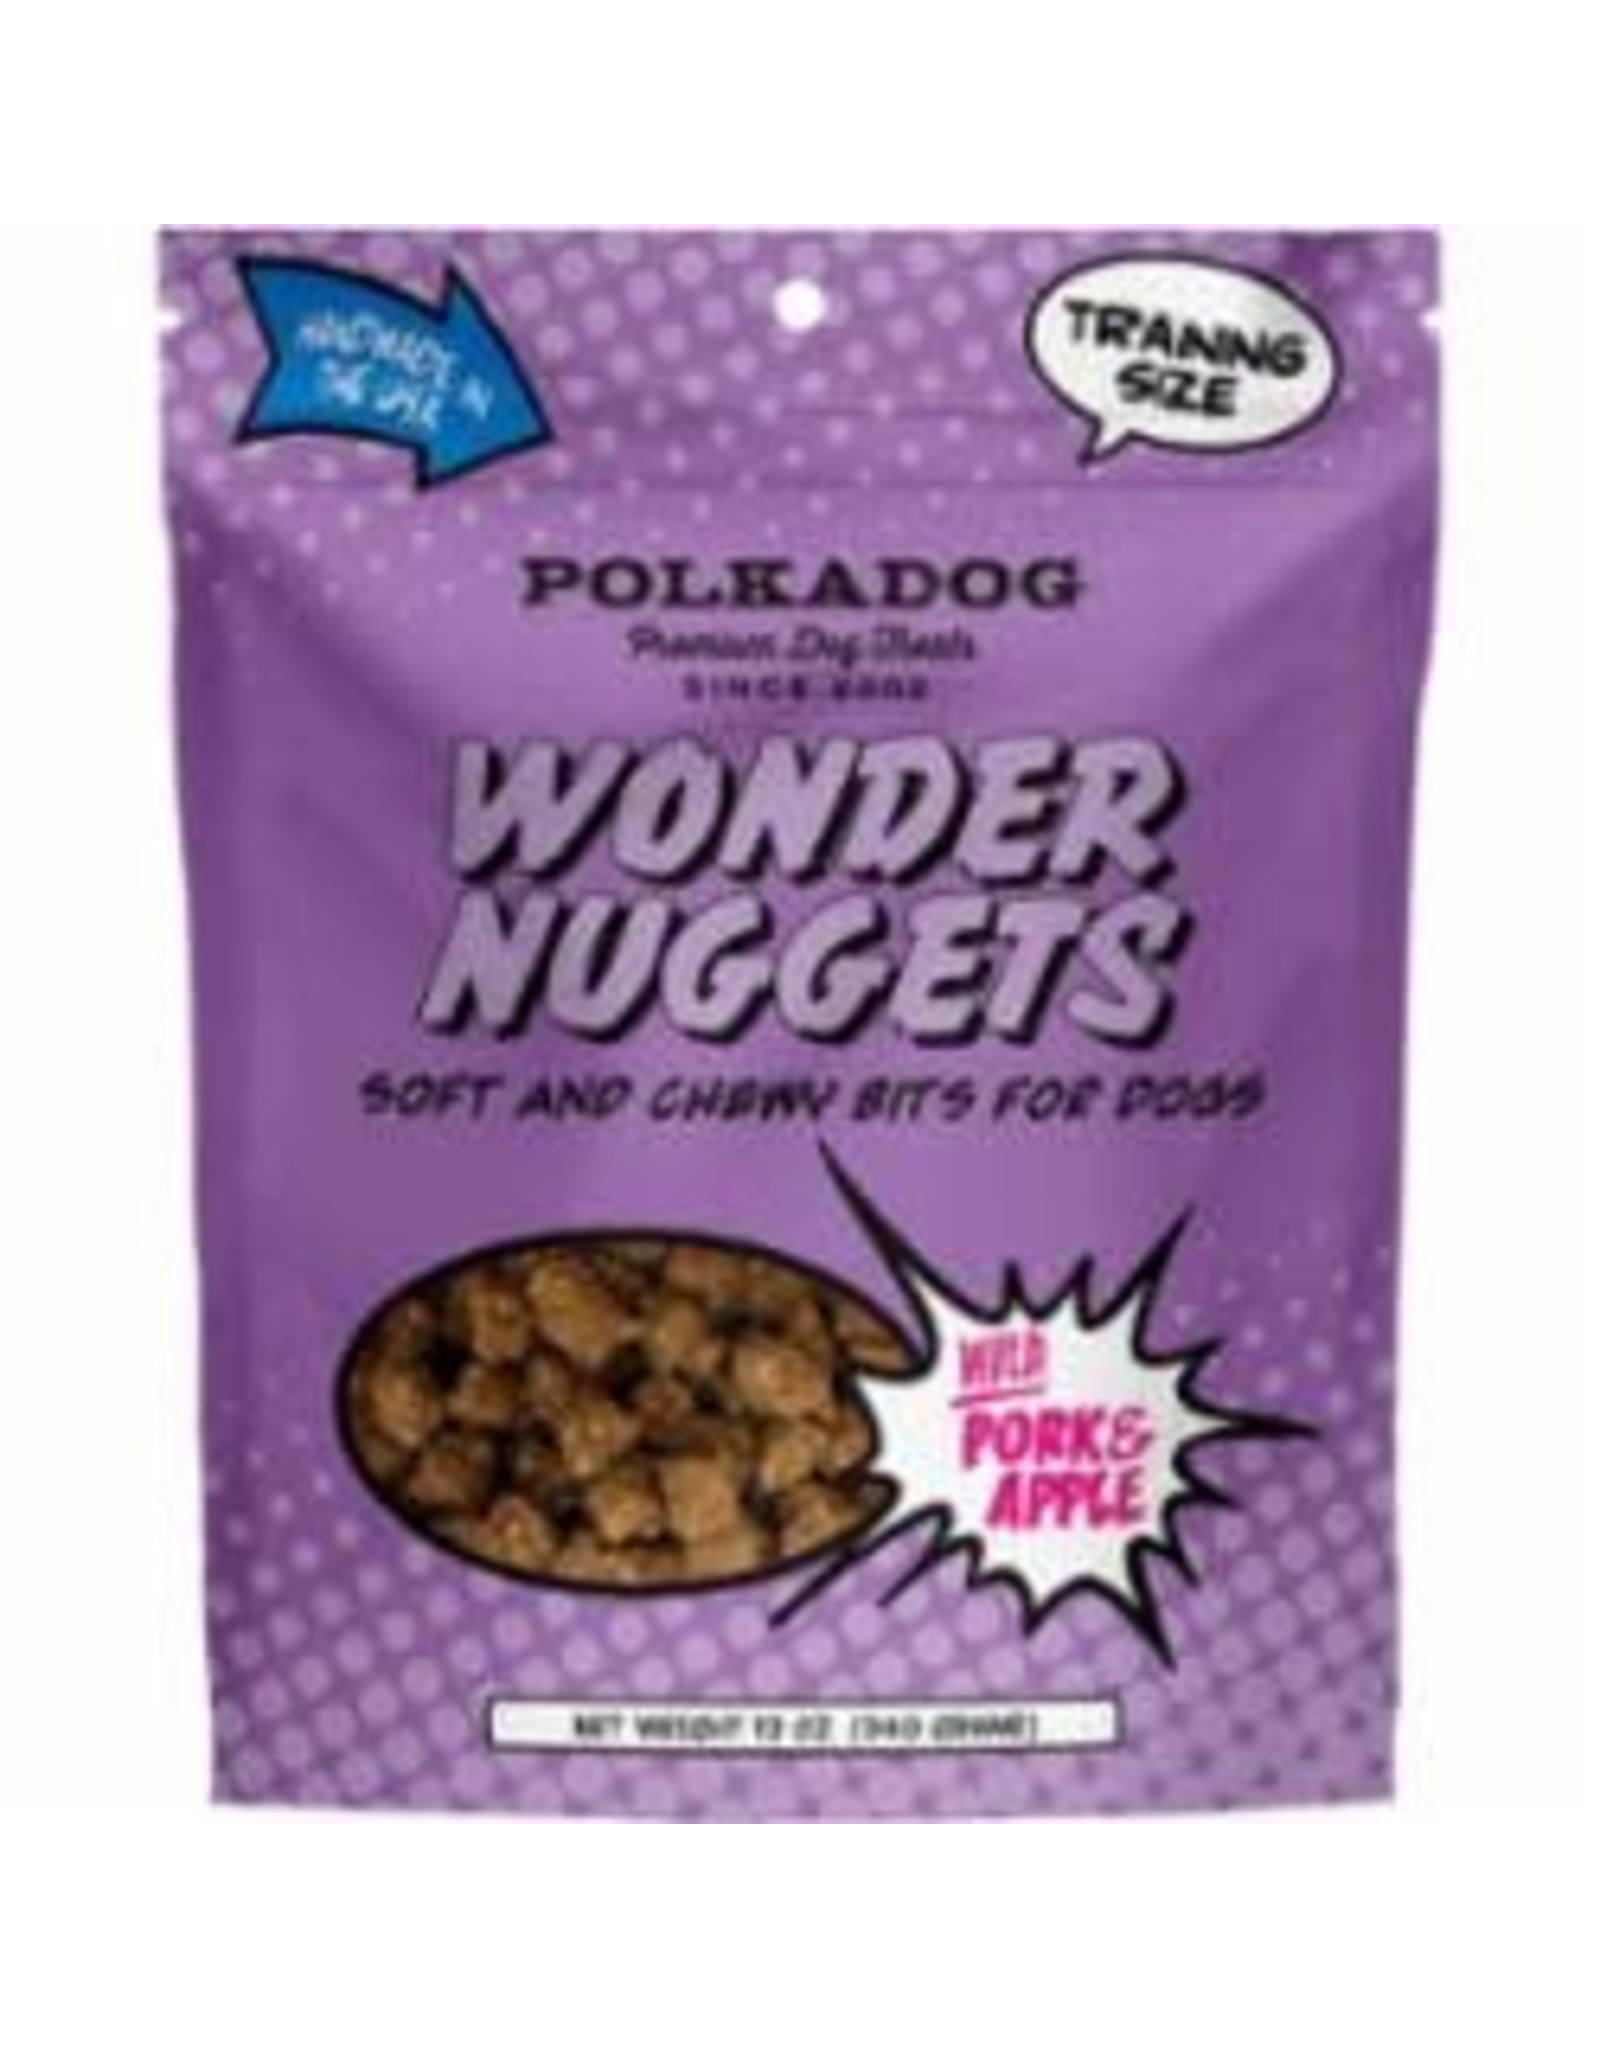 Polkadog Bakery POLKADOG WONDER NUGGETS WITH PORK & APPLE SOFT AND CHEWY BITS FOR DOGS 12OZ